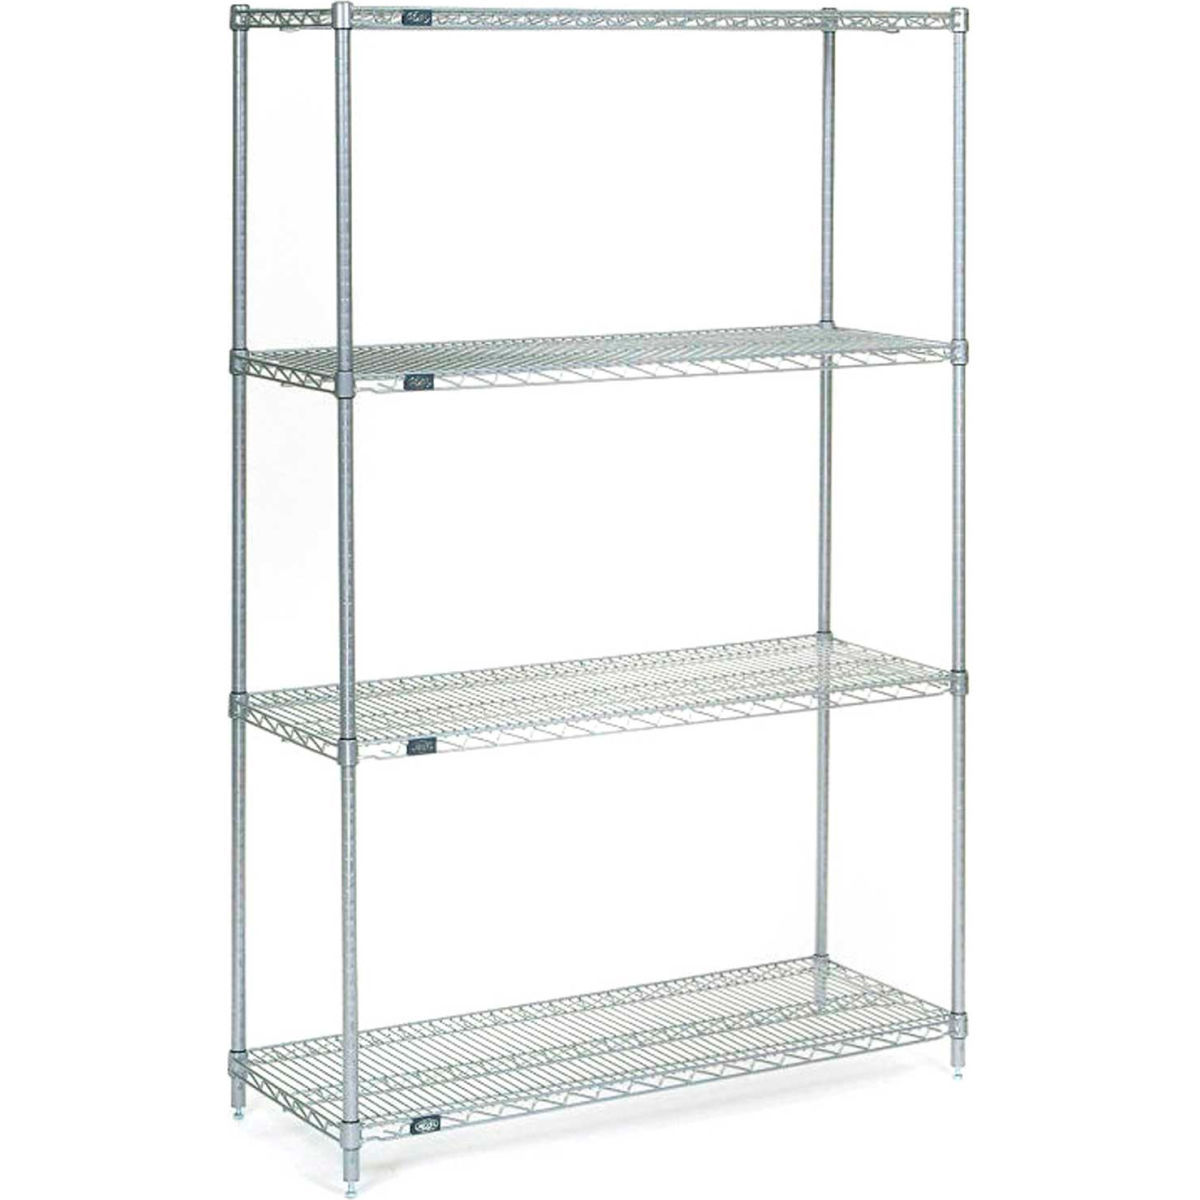 Picture of Global Industrial 14306S 63 x 30 x 14 in. Nexel Stainless Steel Starter Wire Shelving